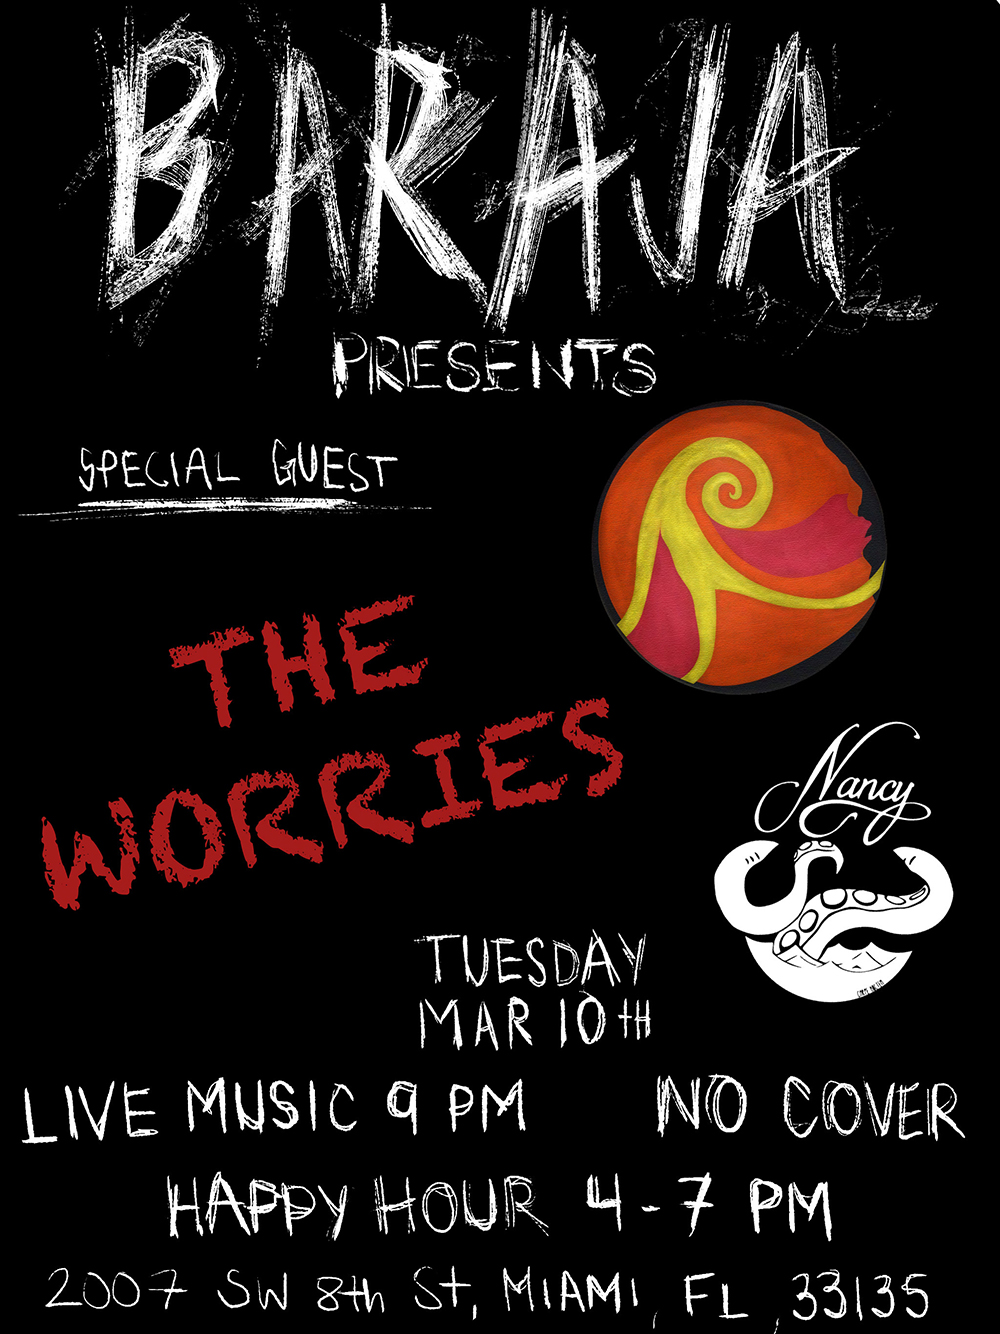 Baraja Presents Tuesdays! With Special Guests | The Worries!